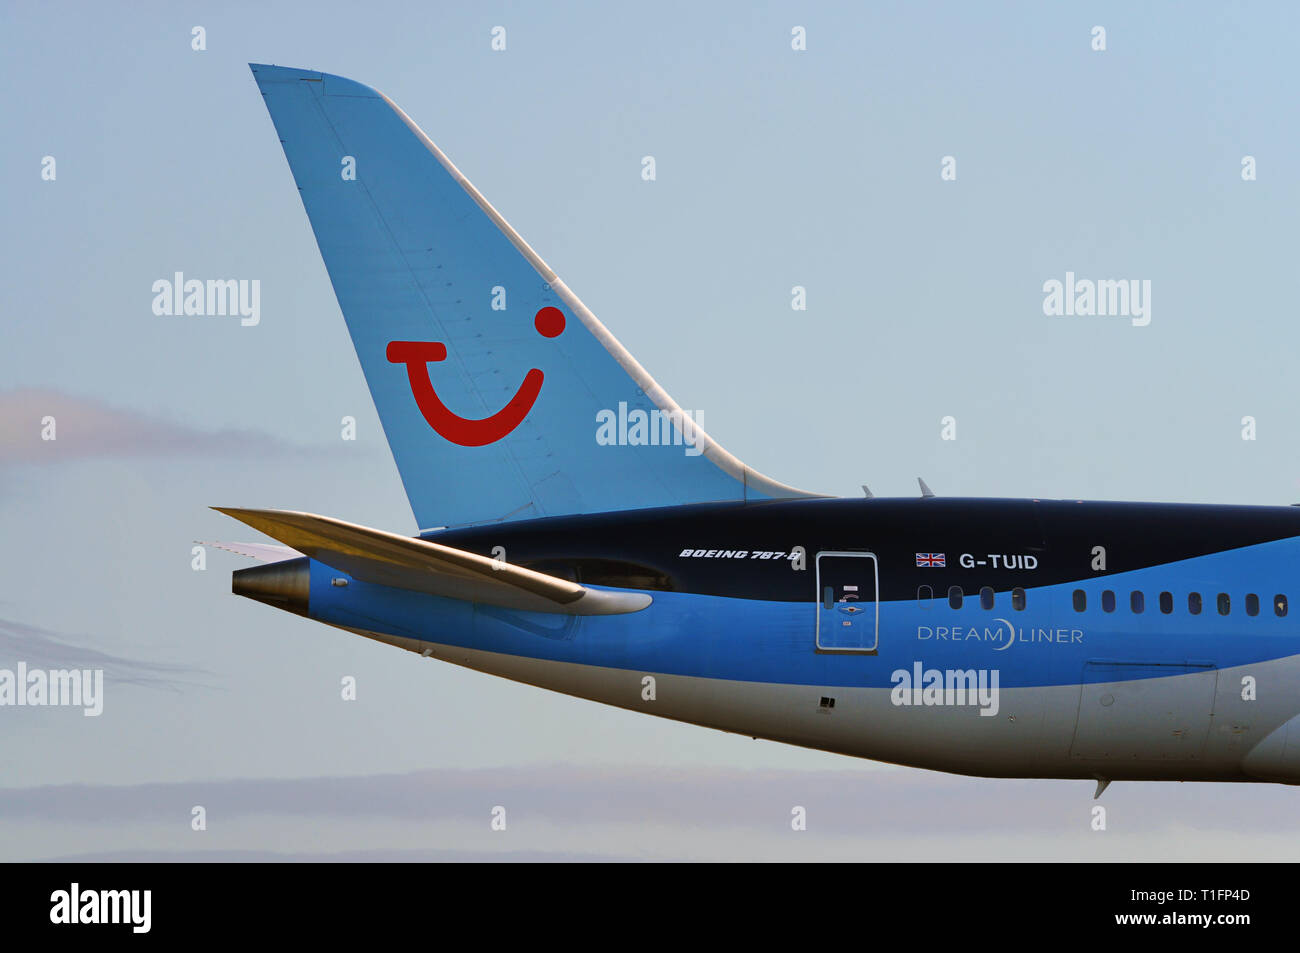 Manchester Airport, United Kingdom - January 8, 2018: TUI Airways Boeing 787-8 MSN 36424 G-TUID moments after take off. Stock Photo